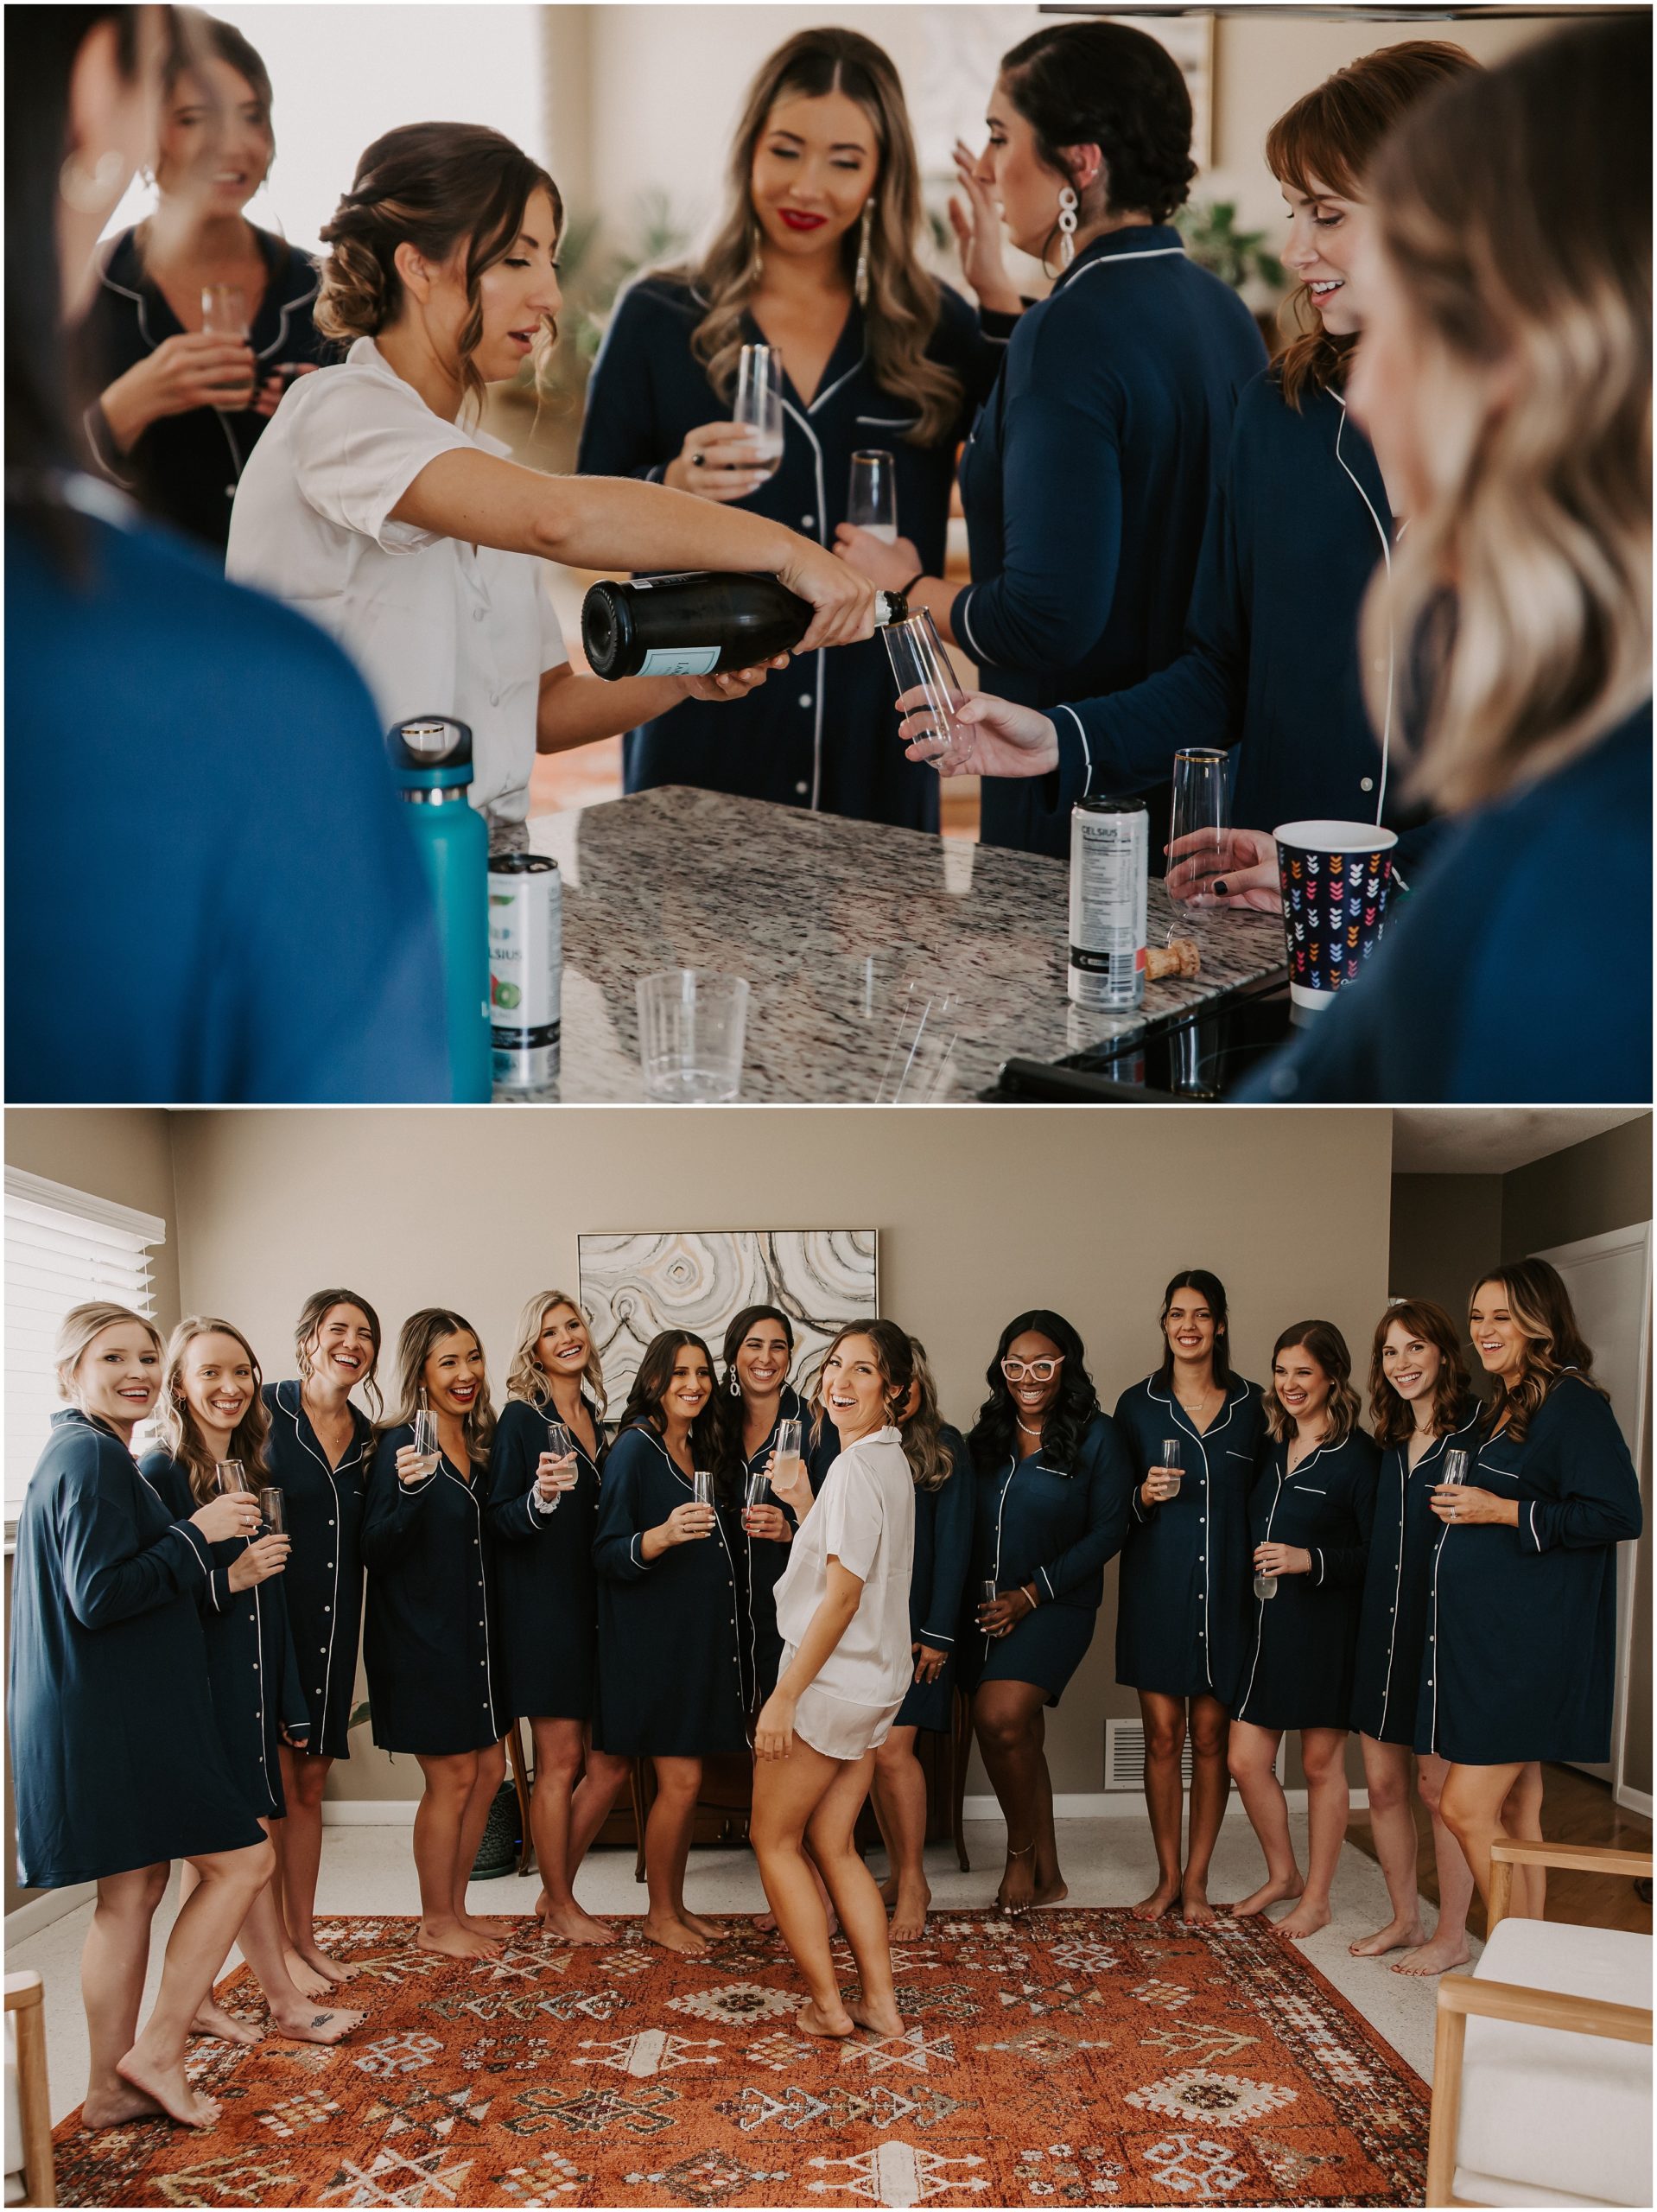 Alyssa and her Girls getting ready for the stylish wedding